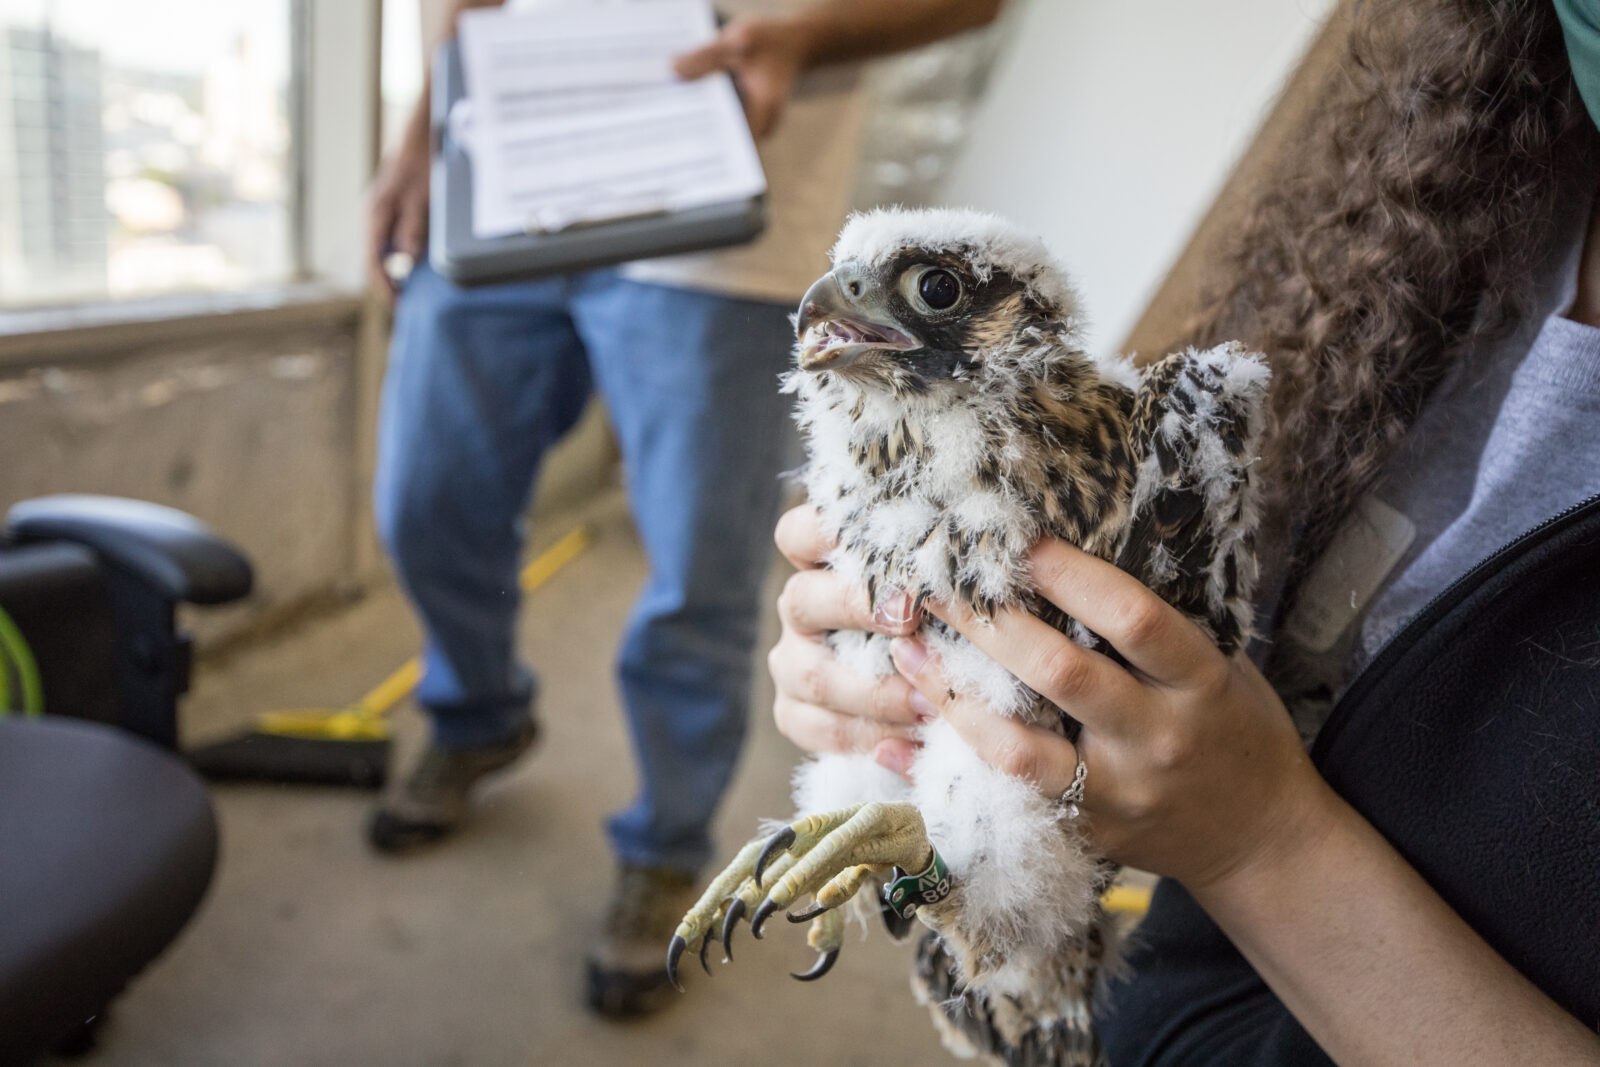 The falcon chick can now be identified by onlookers with the 88/AV band on its left leg.